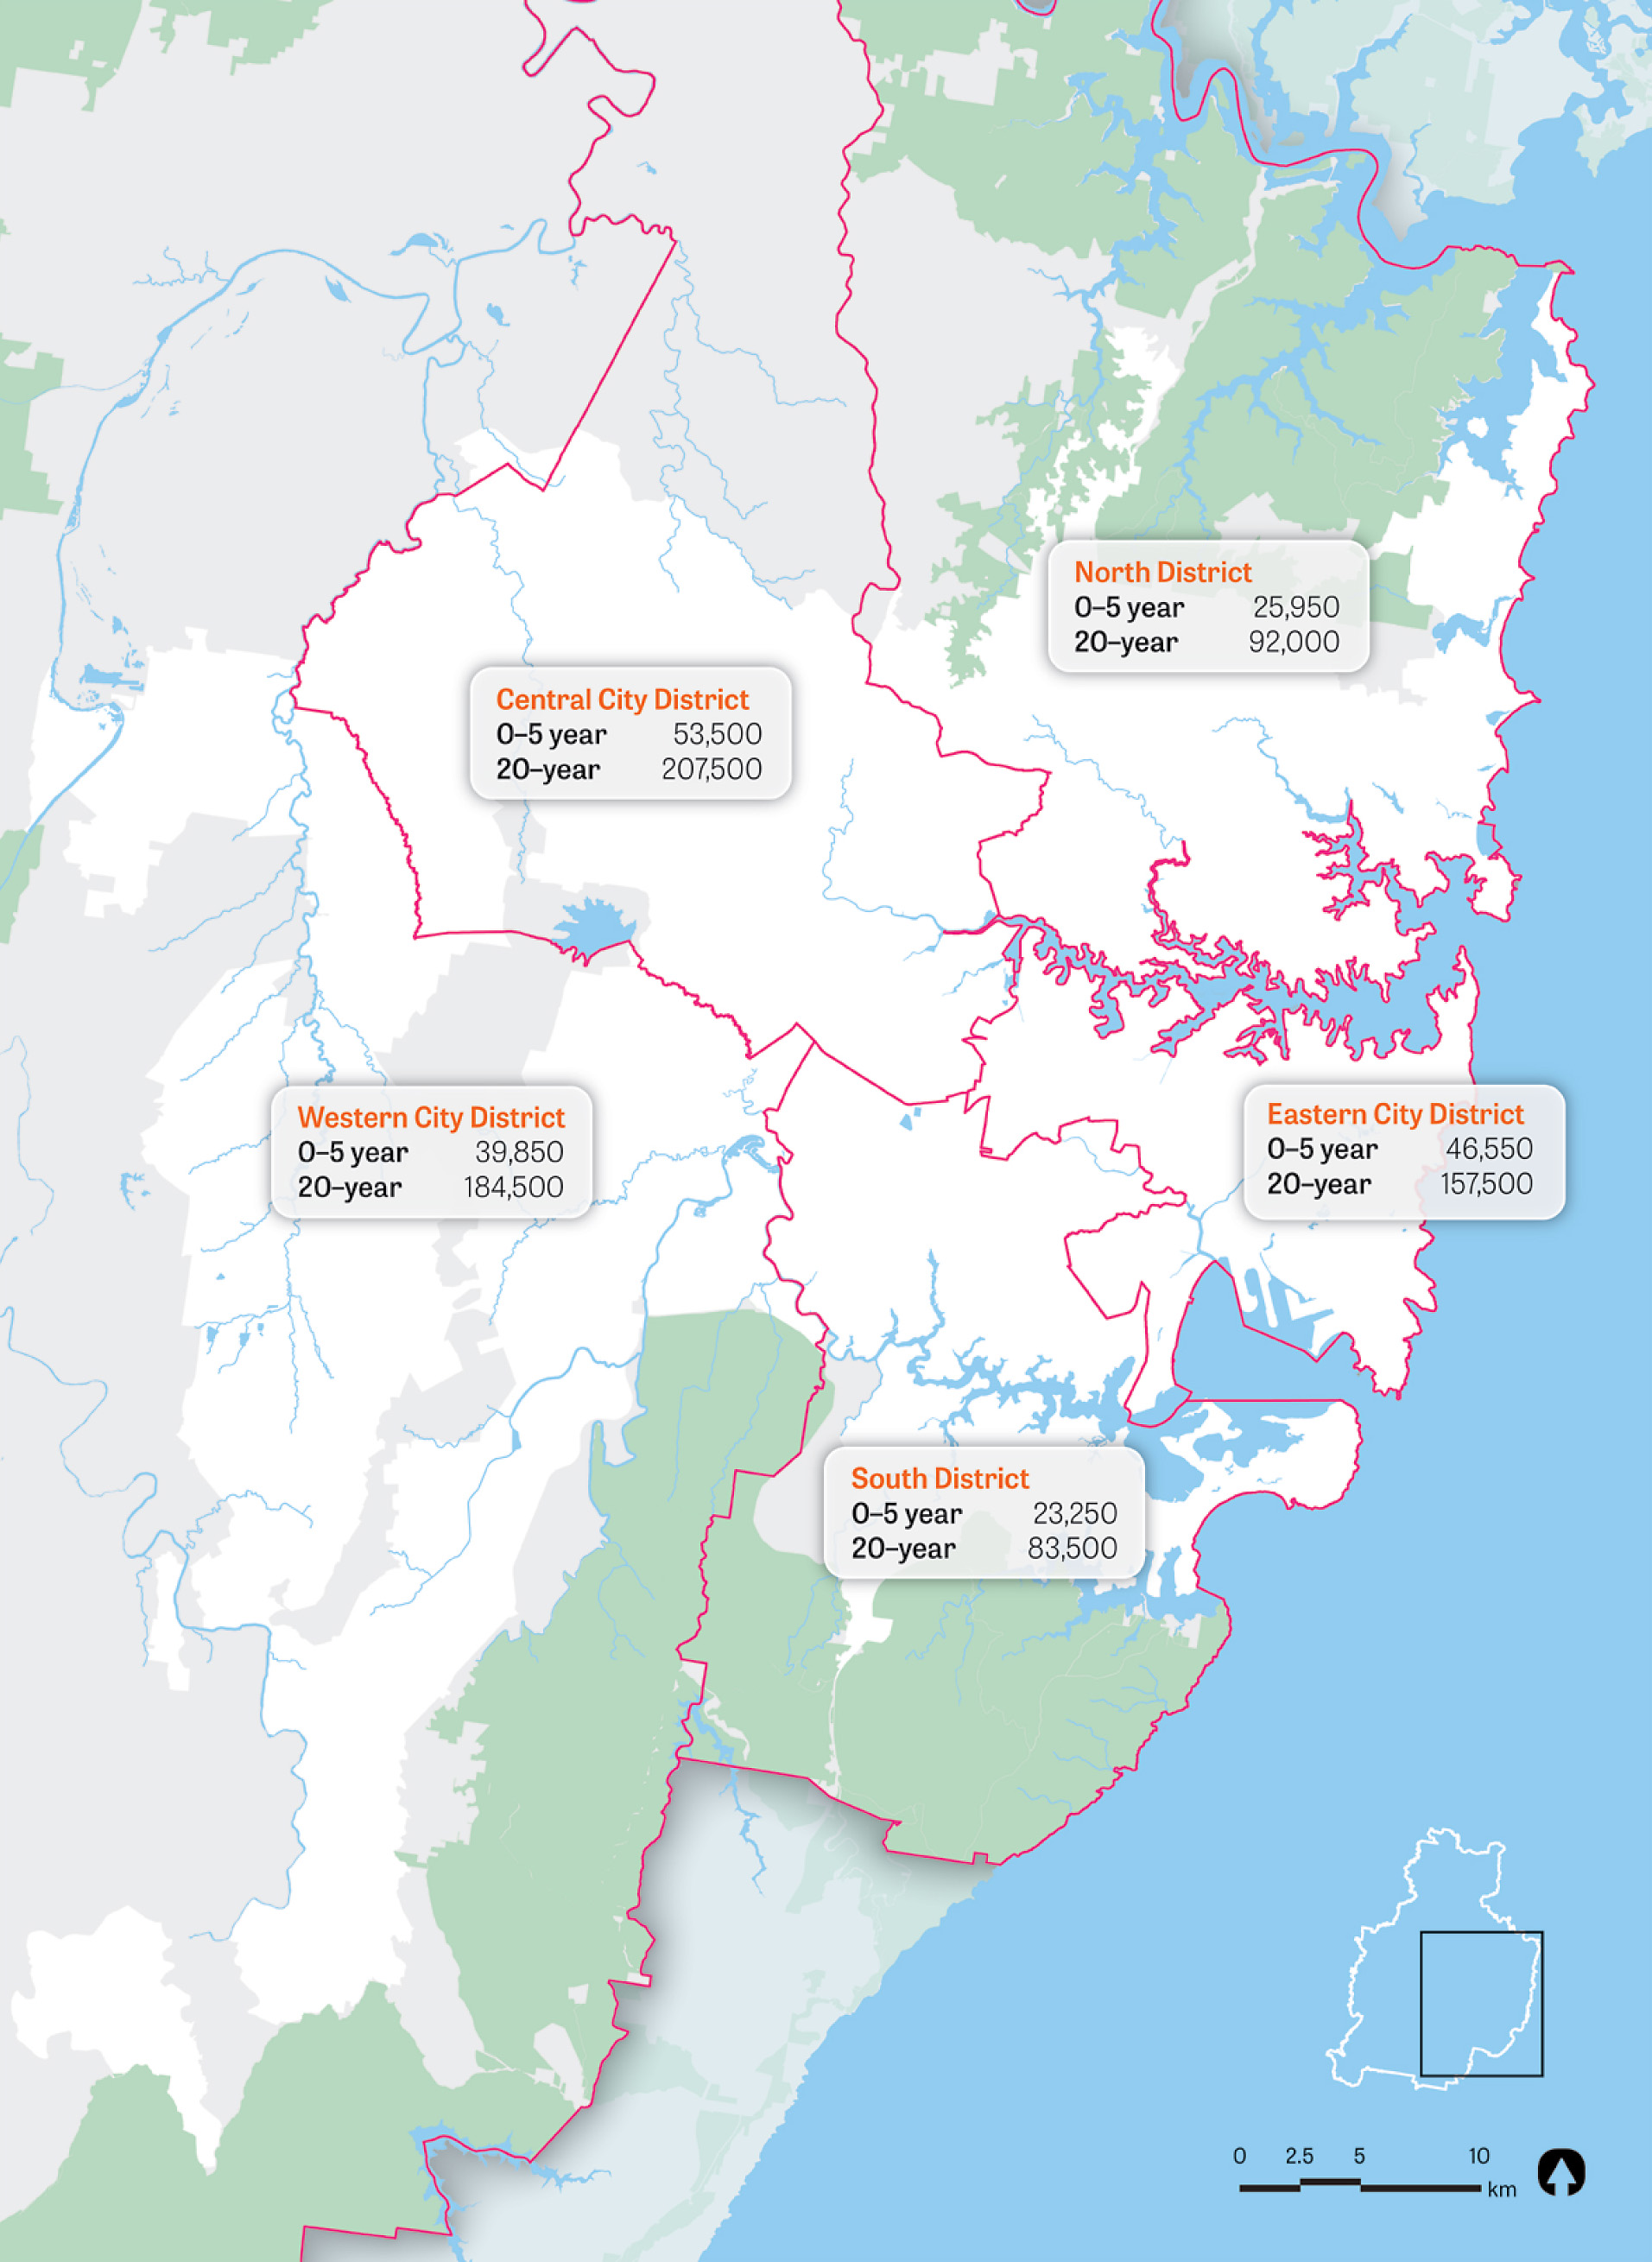 ▲ Housing targets for 2016-2036 planned in growth corridors including Parramatta and the Bradfield/Aerotropolis region. Image: Greater Sydney Commission 